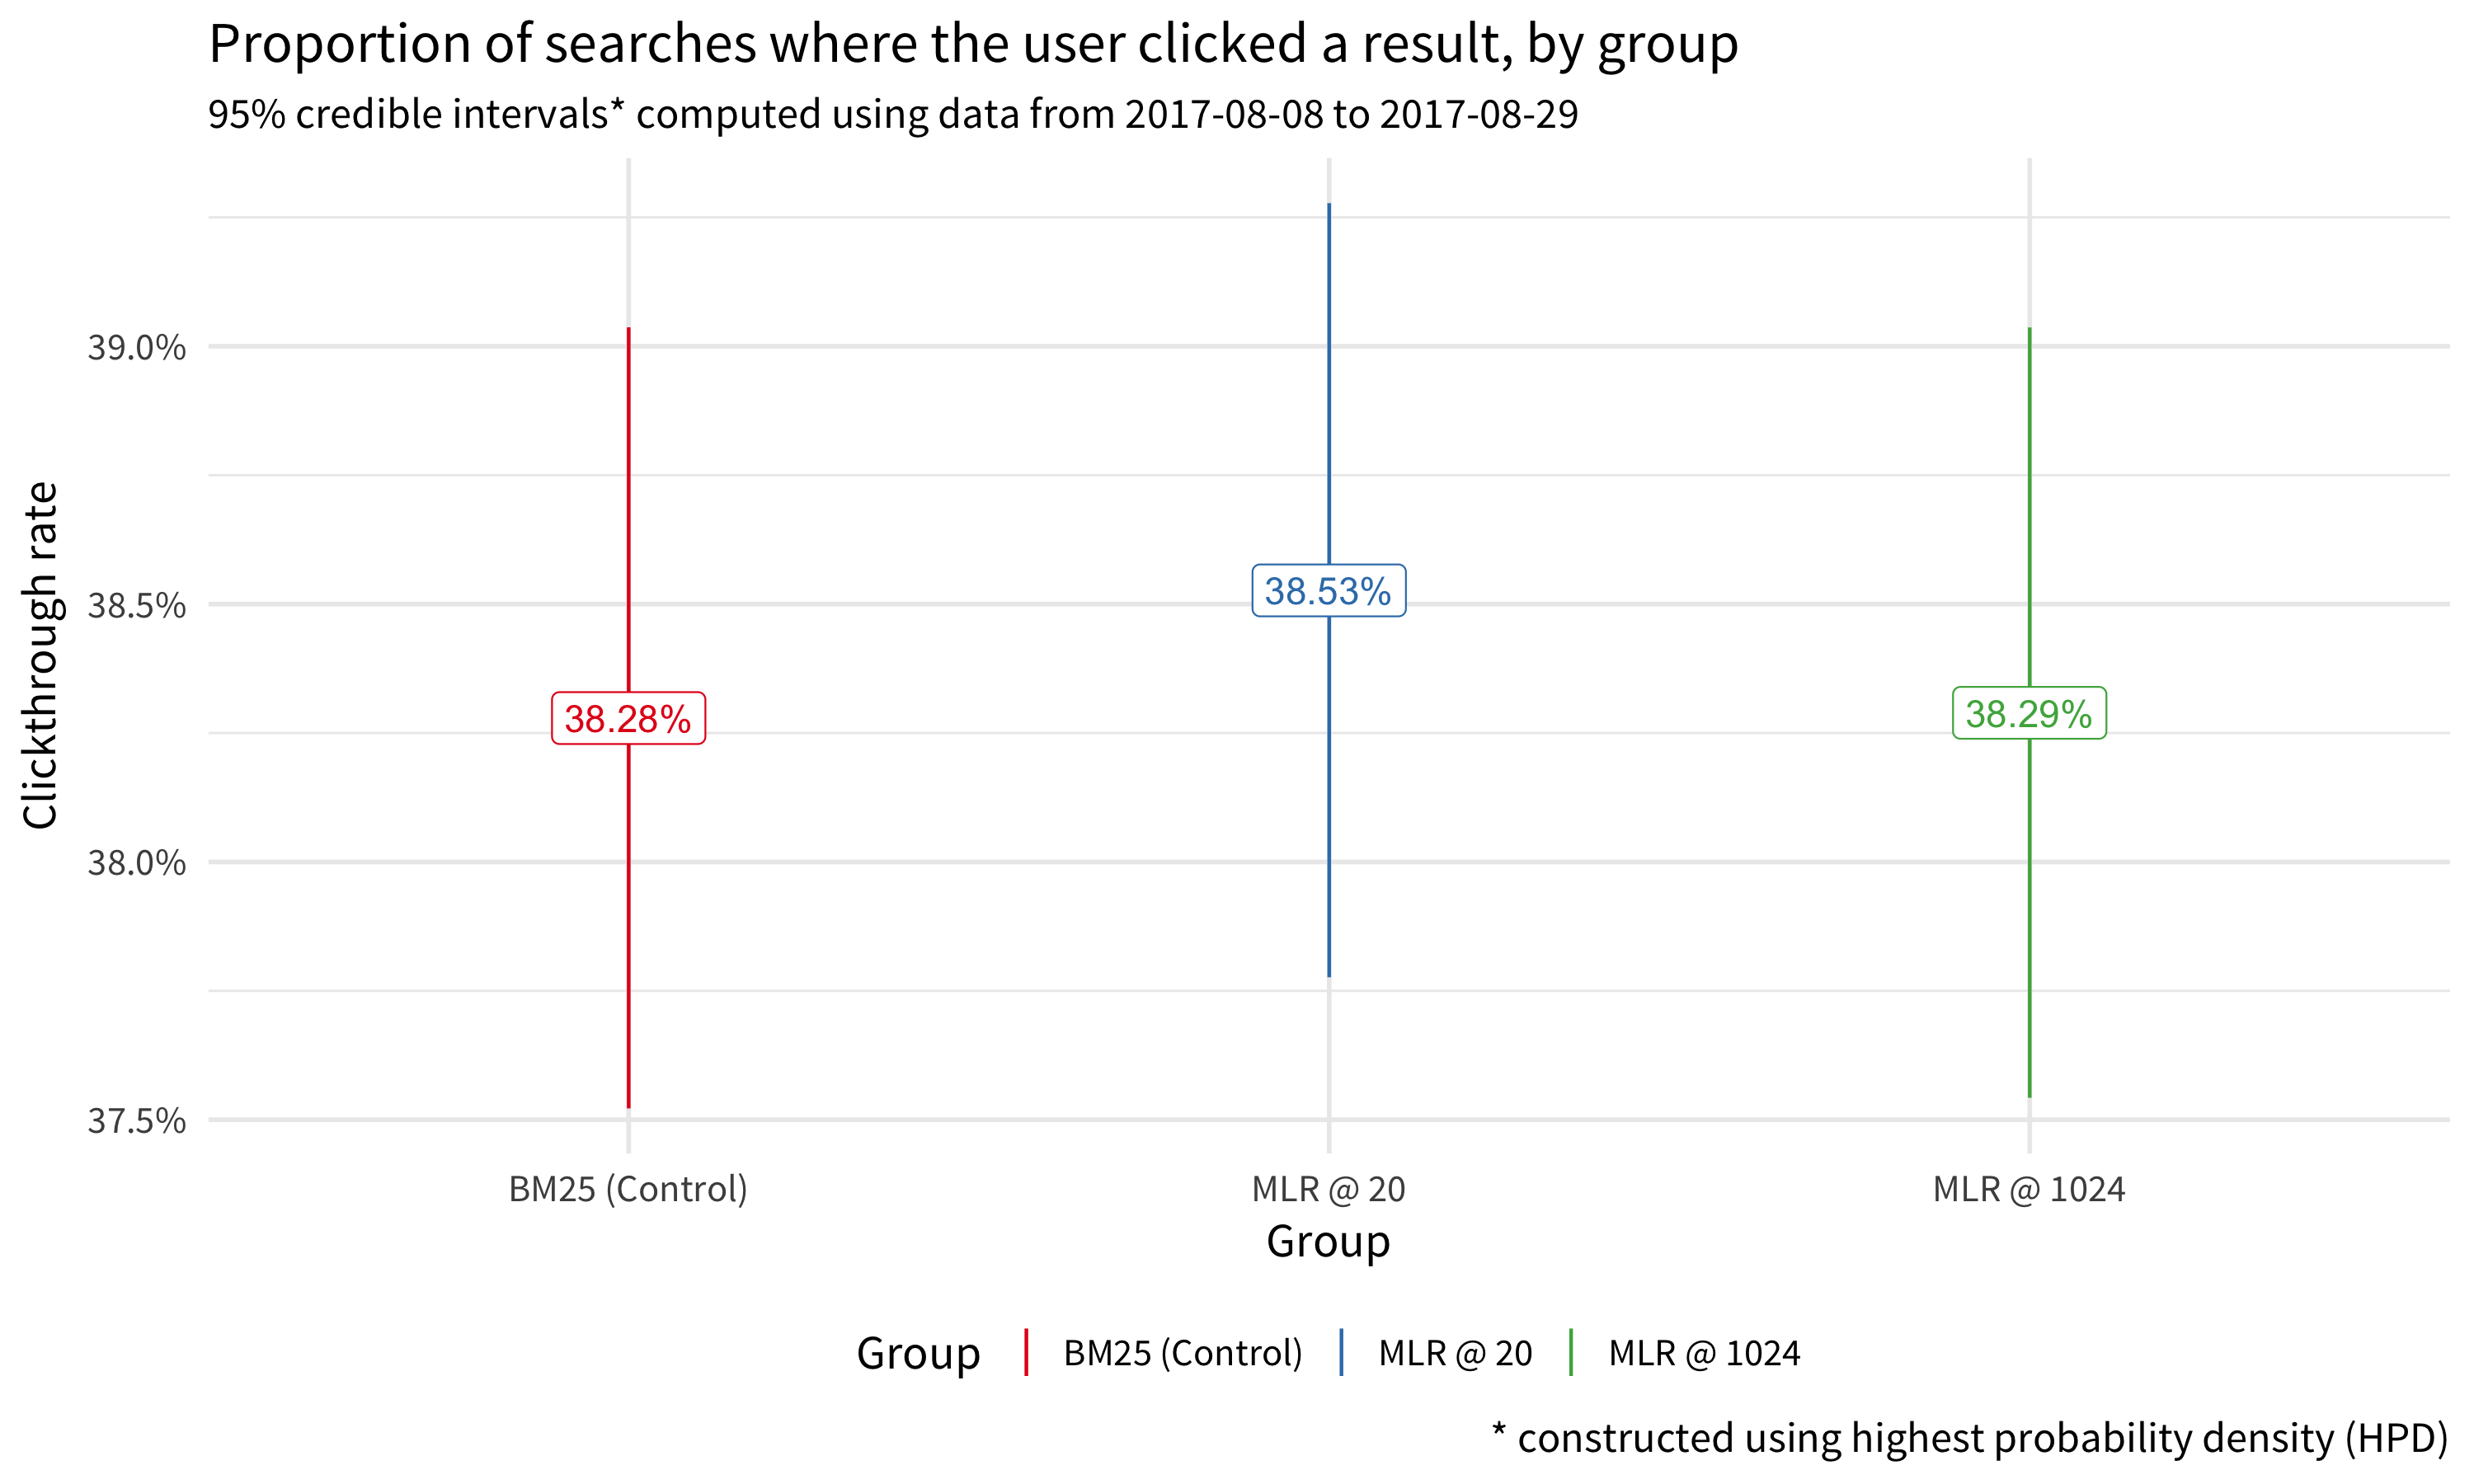 **Figure 2**: MLR@20 experimental group had slightly higher engagement with their MLR-provided search results than the control group had with their BM25-provided search results, but not by much.